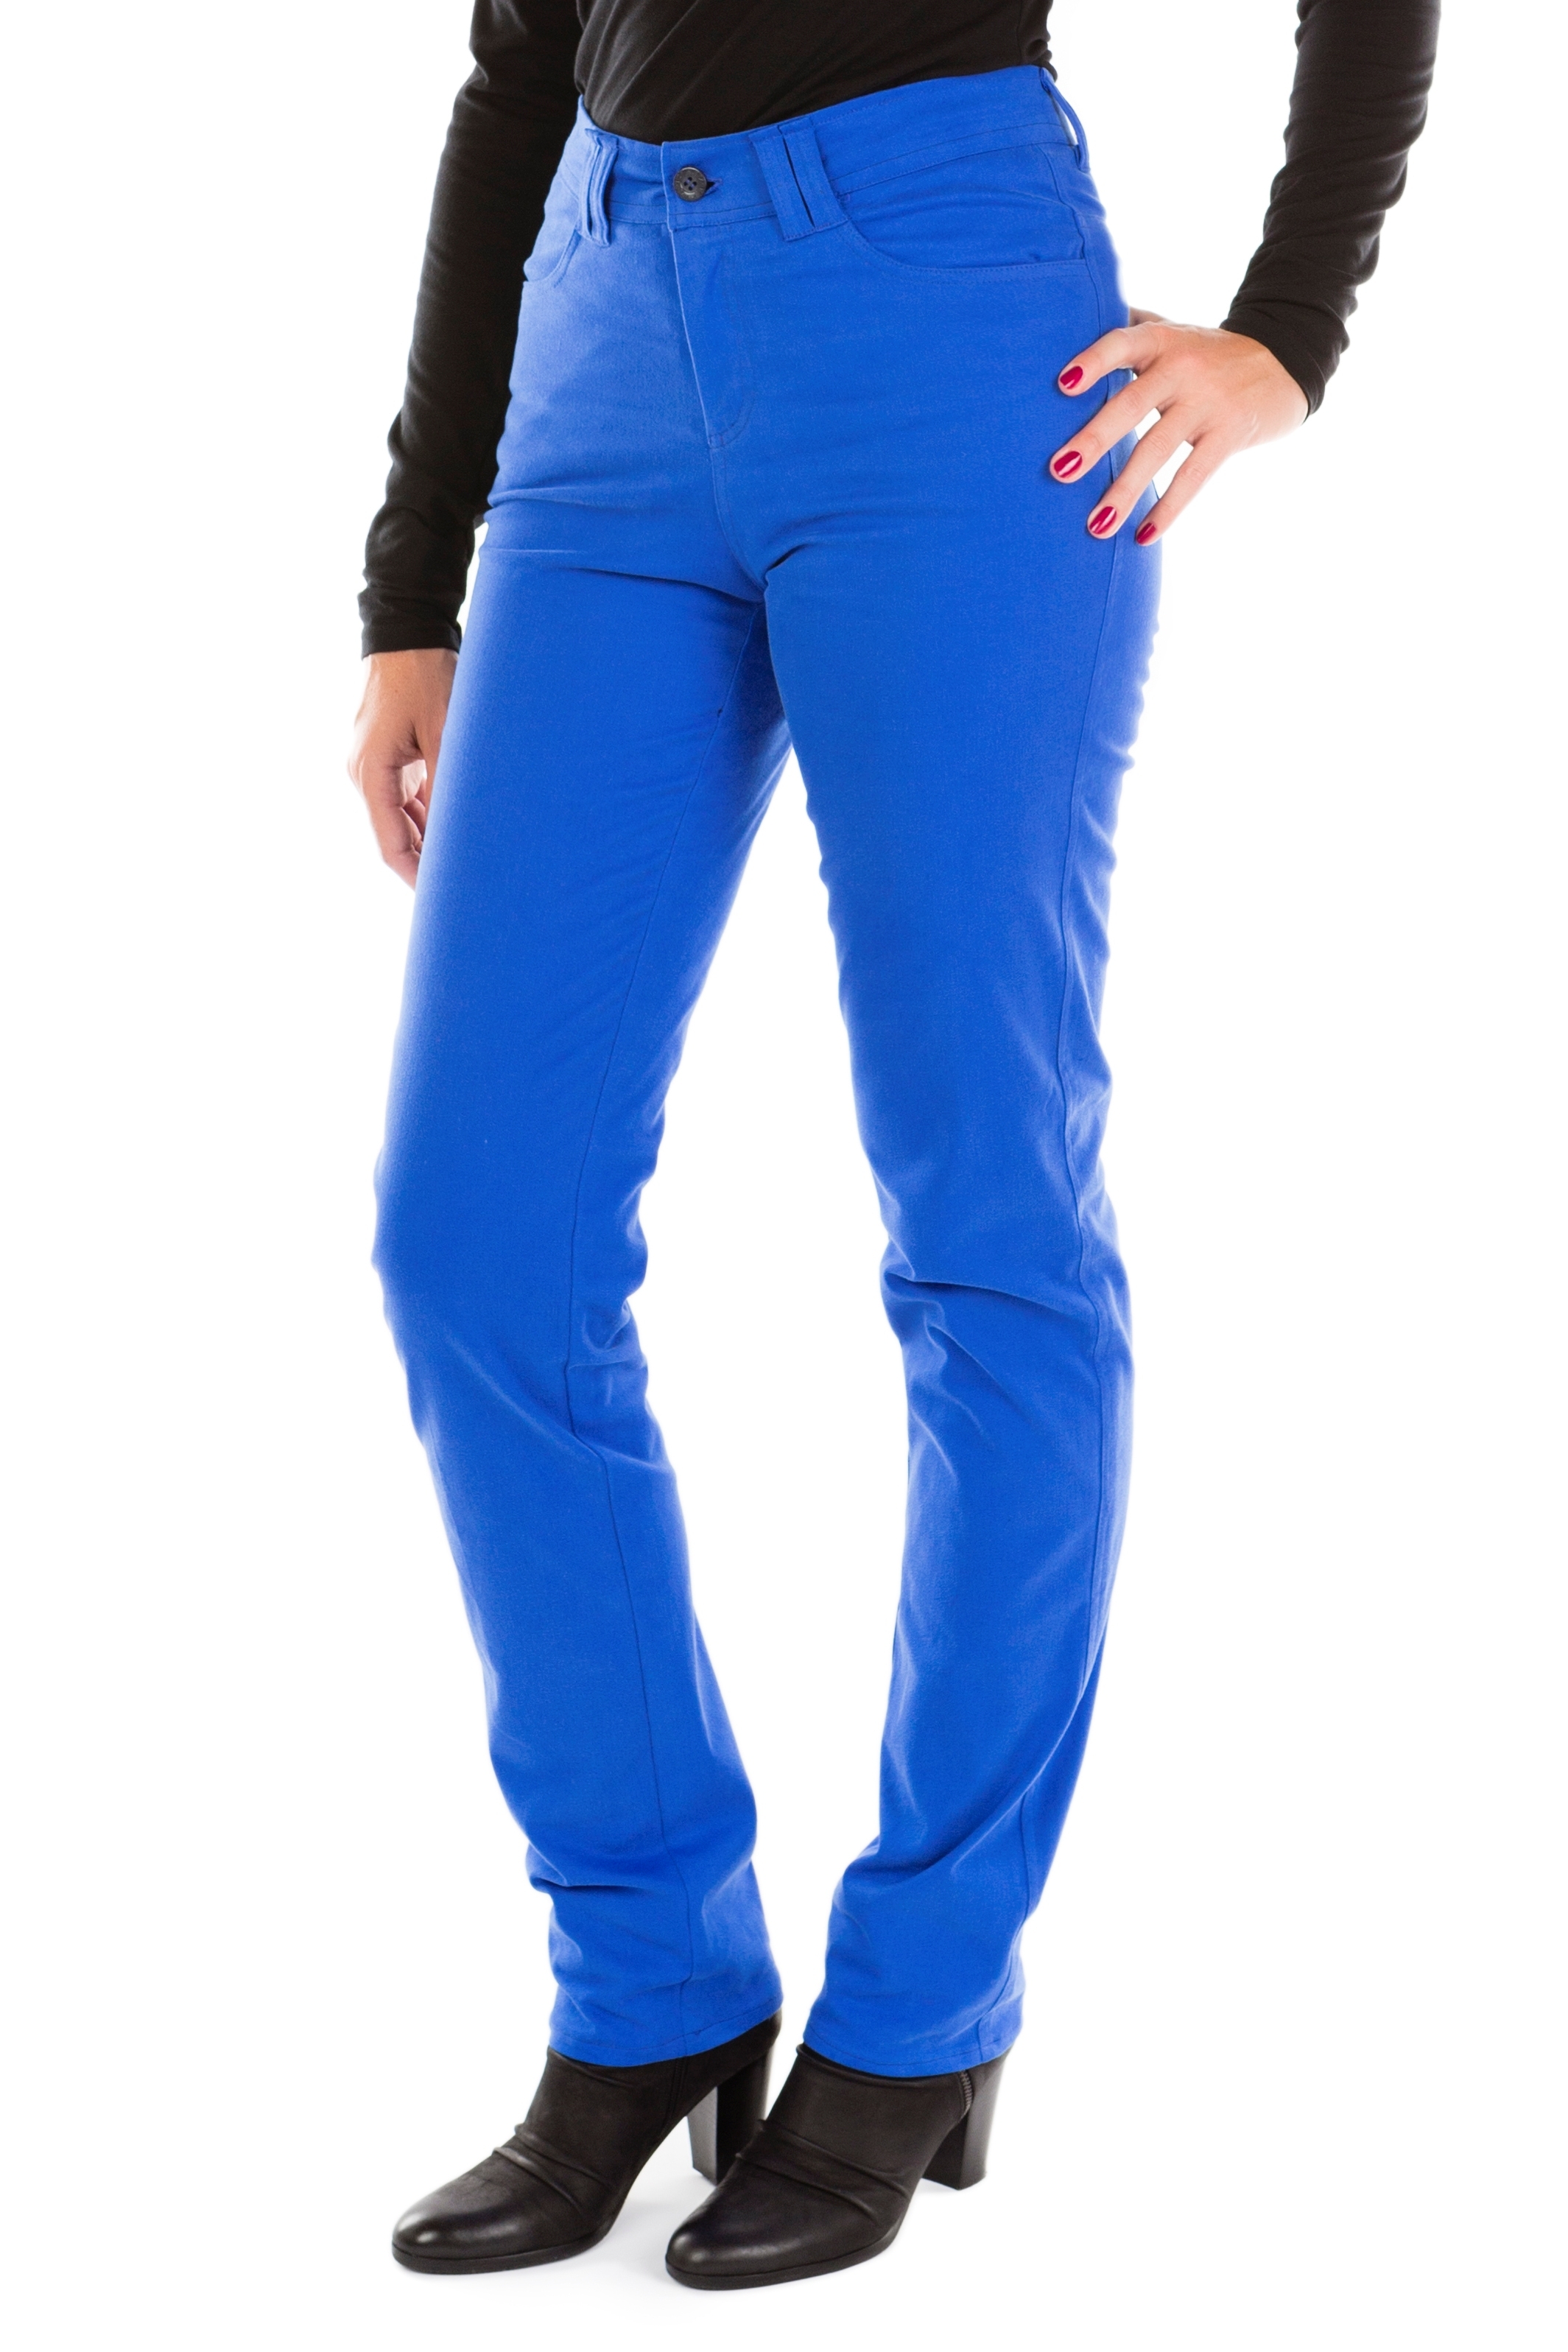 royal blue jeans for ladies